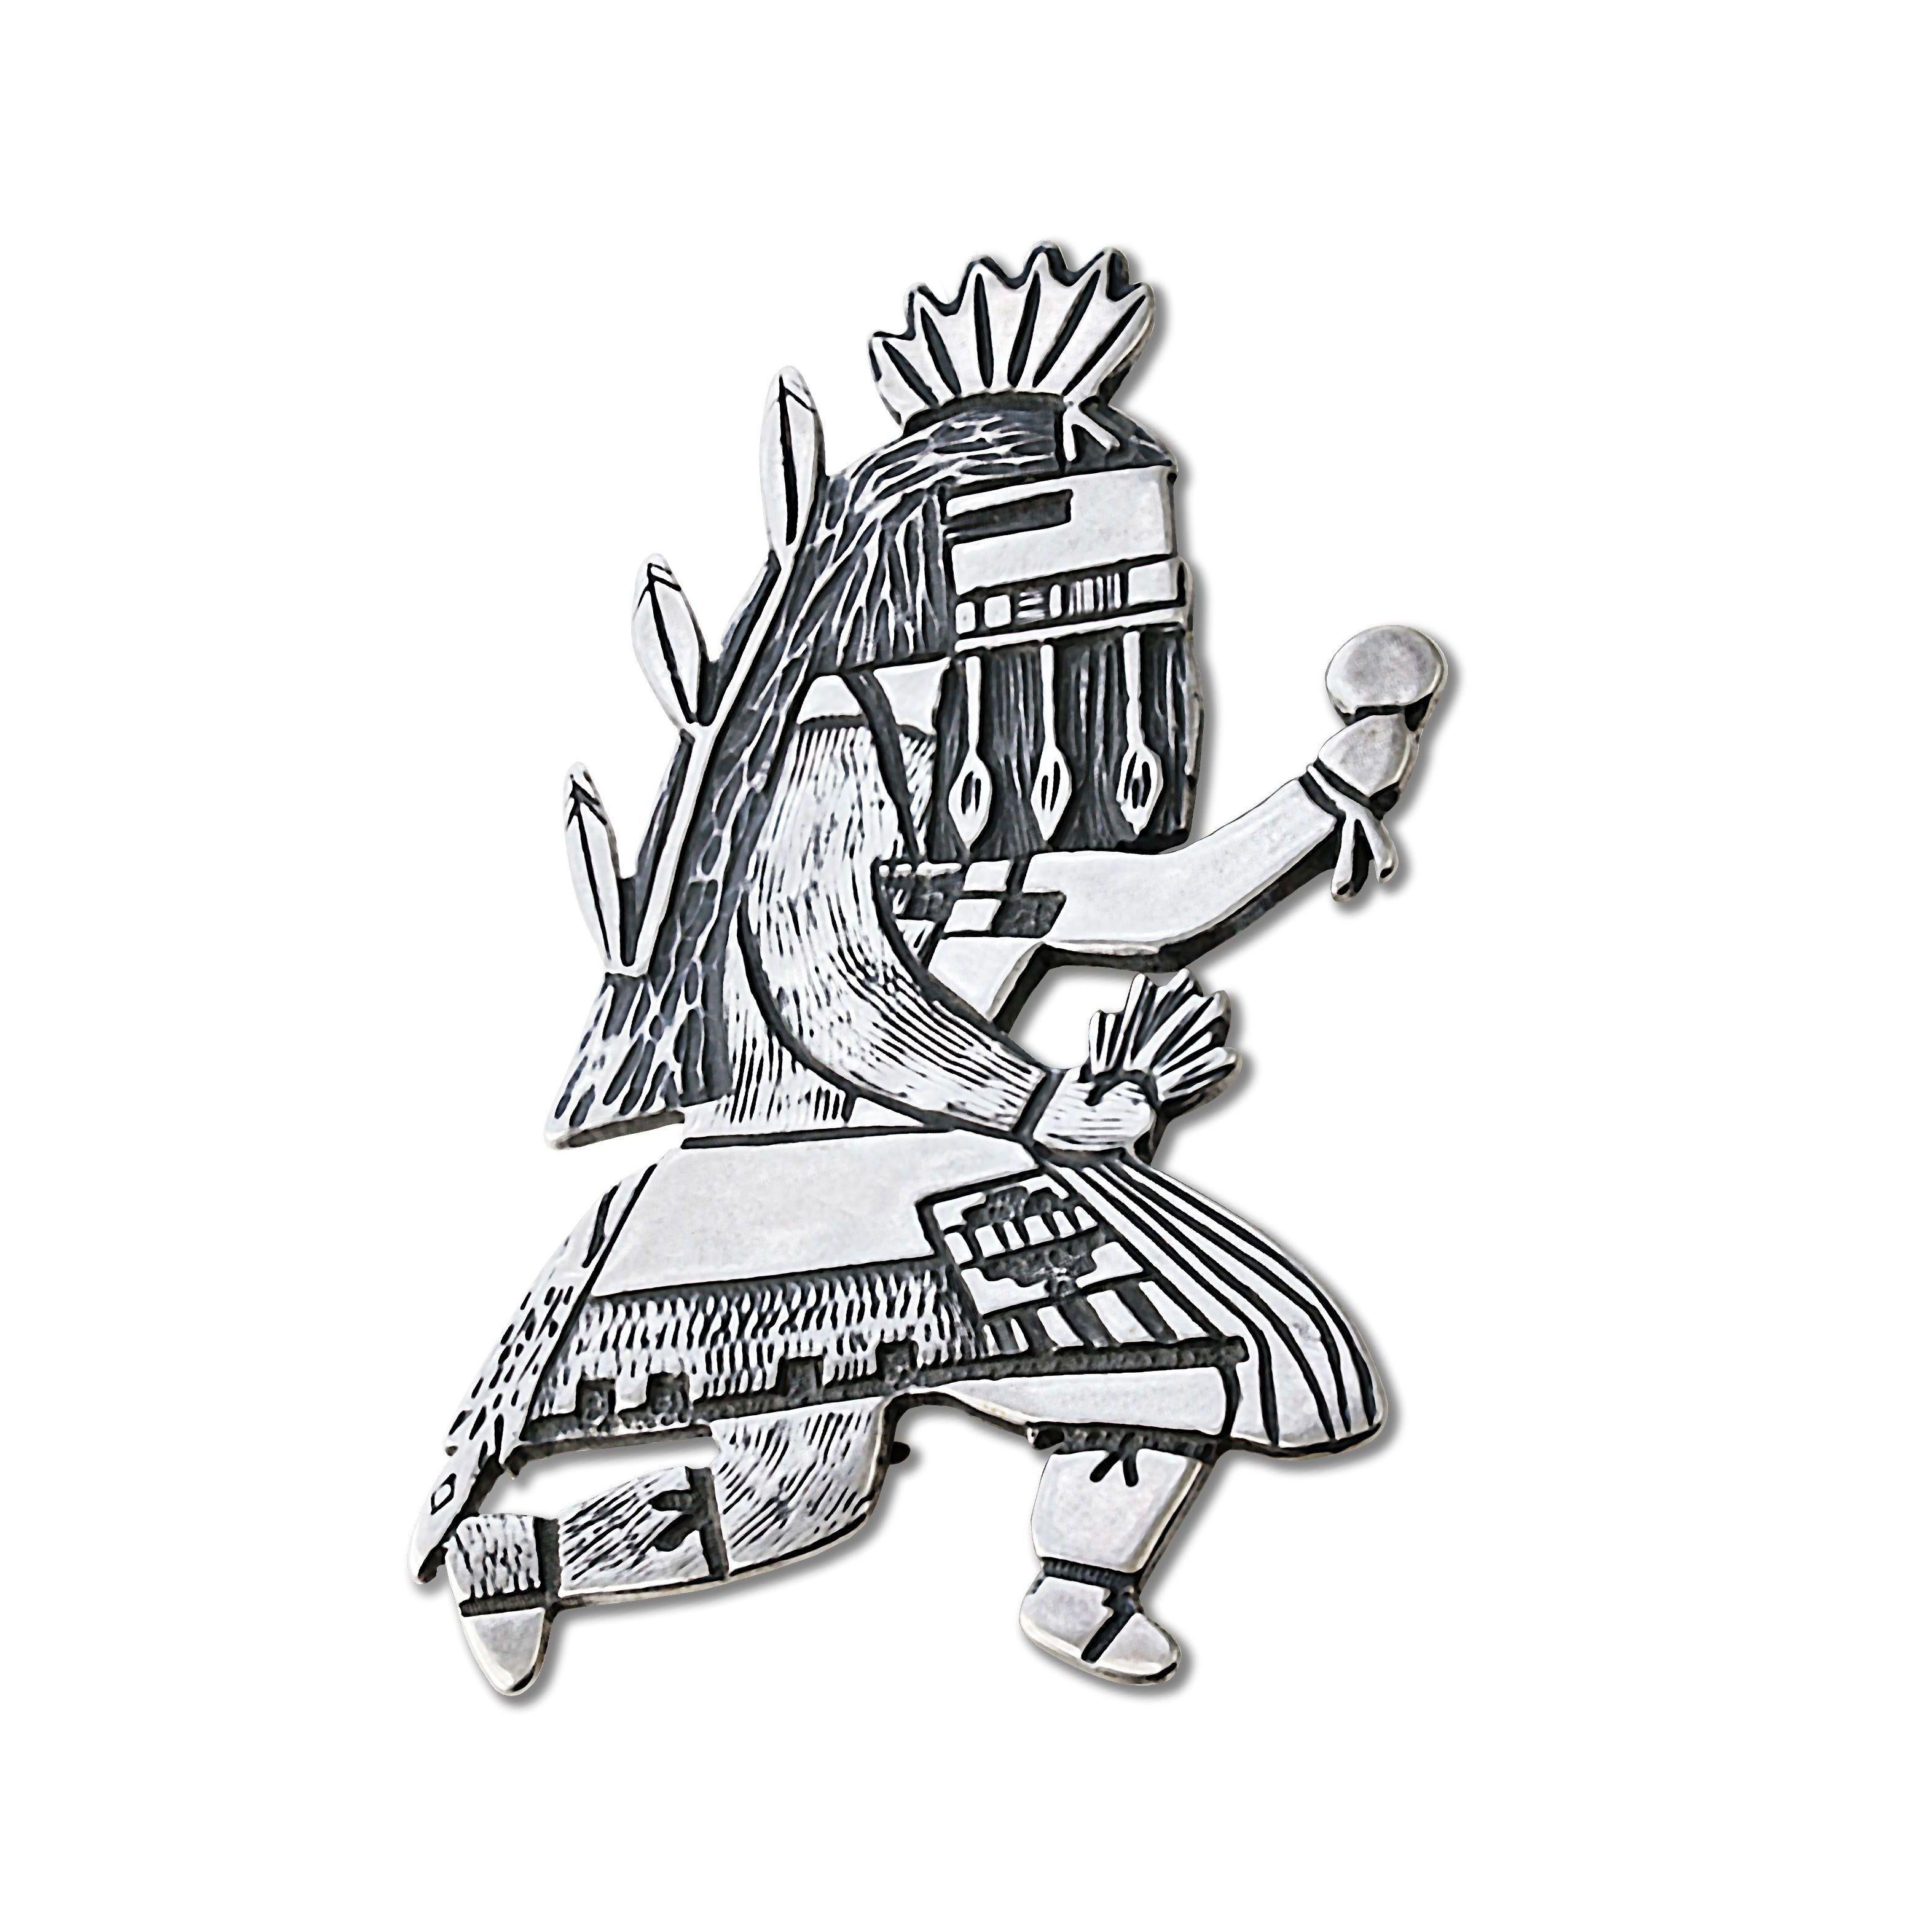 Vintage Mid Century Modern North American Navajo Decorative Sterling Silver Prayer Dancer Pendant Brooch Pin. The silversmith has created a somewhat Storyteller Prayer Dancer using decorative Embossed and Engraved techniques. The Prayer Dancer holds